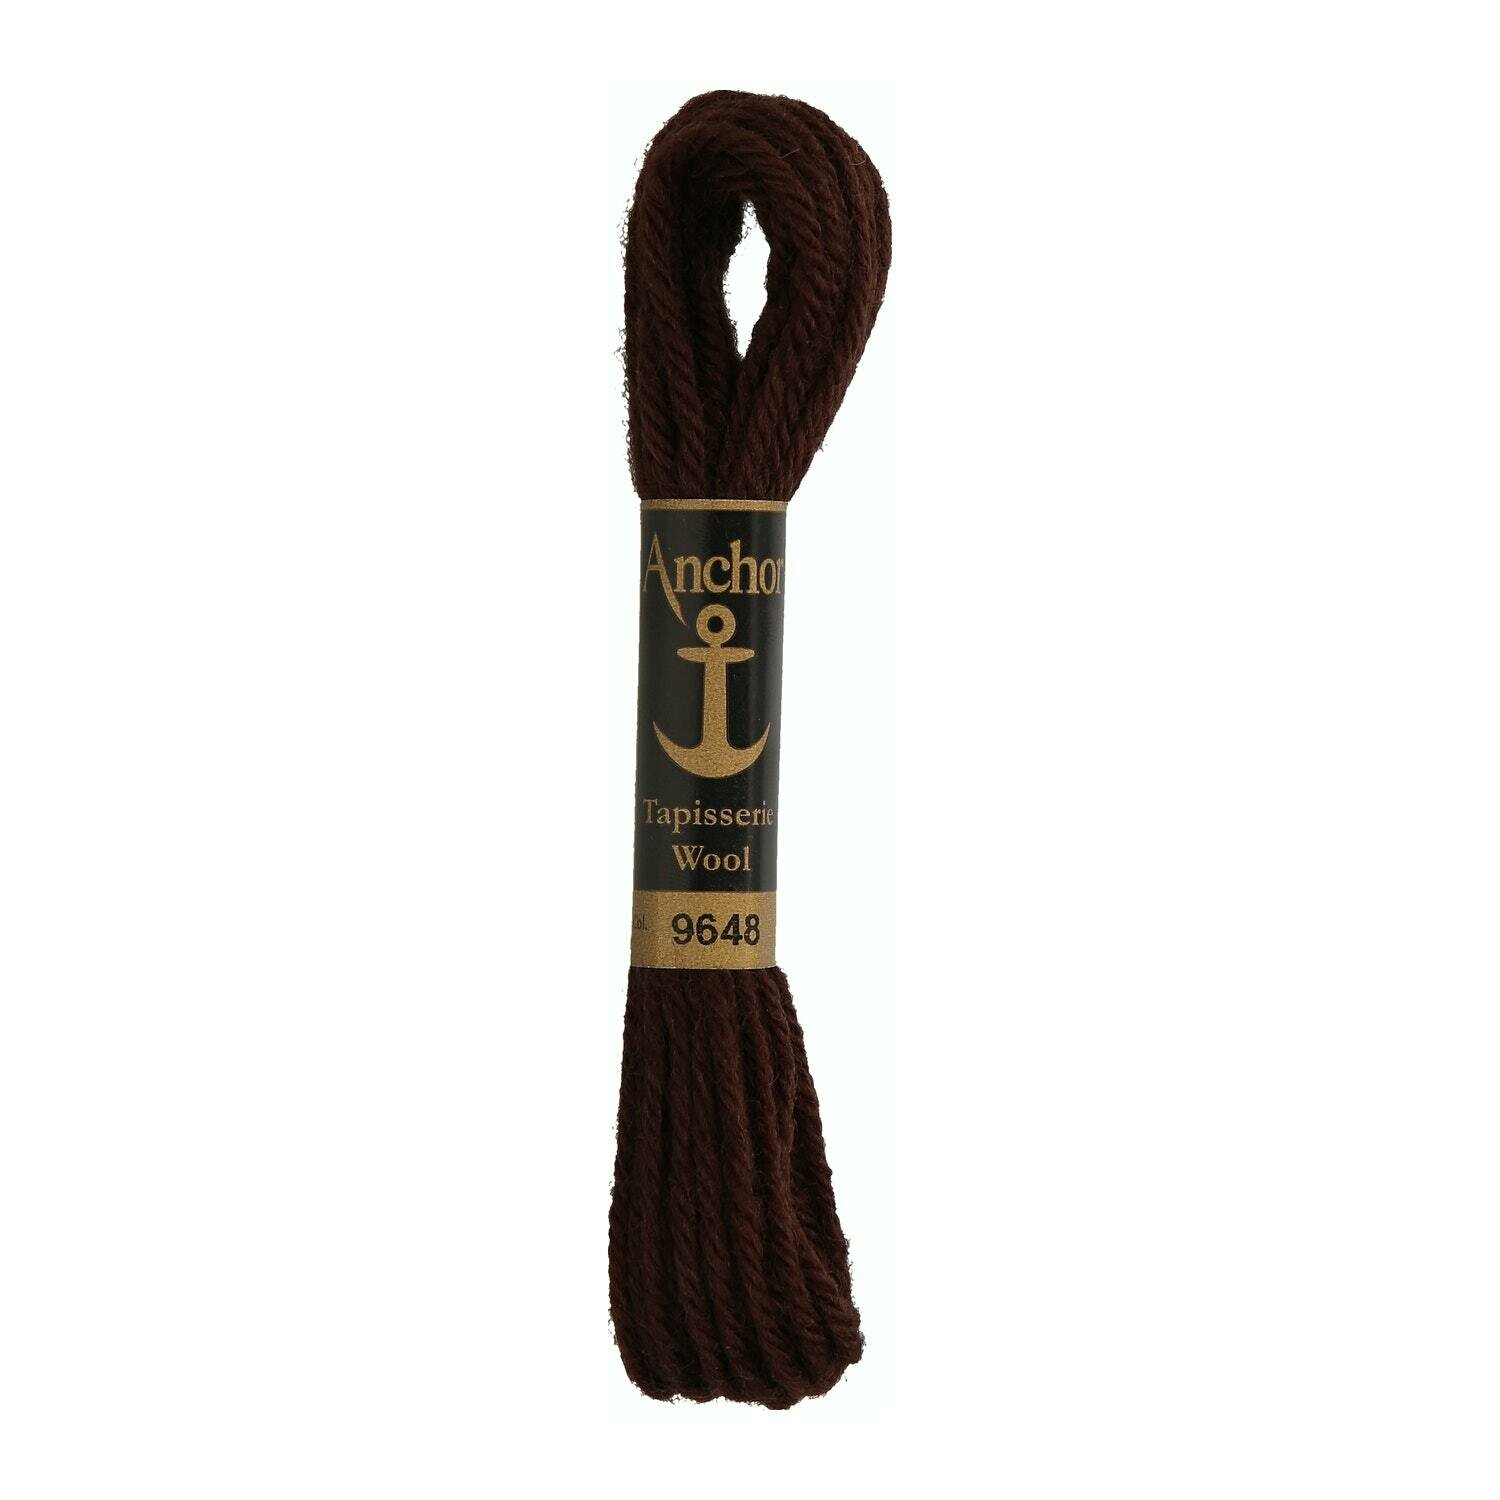 Anchor Tapisserie Wool # 09648